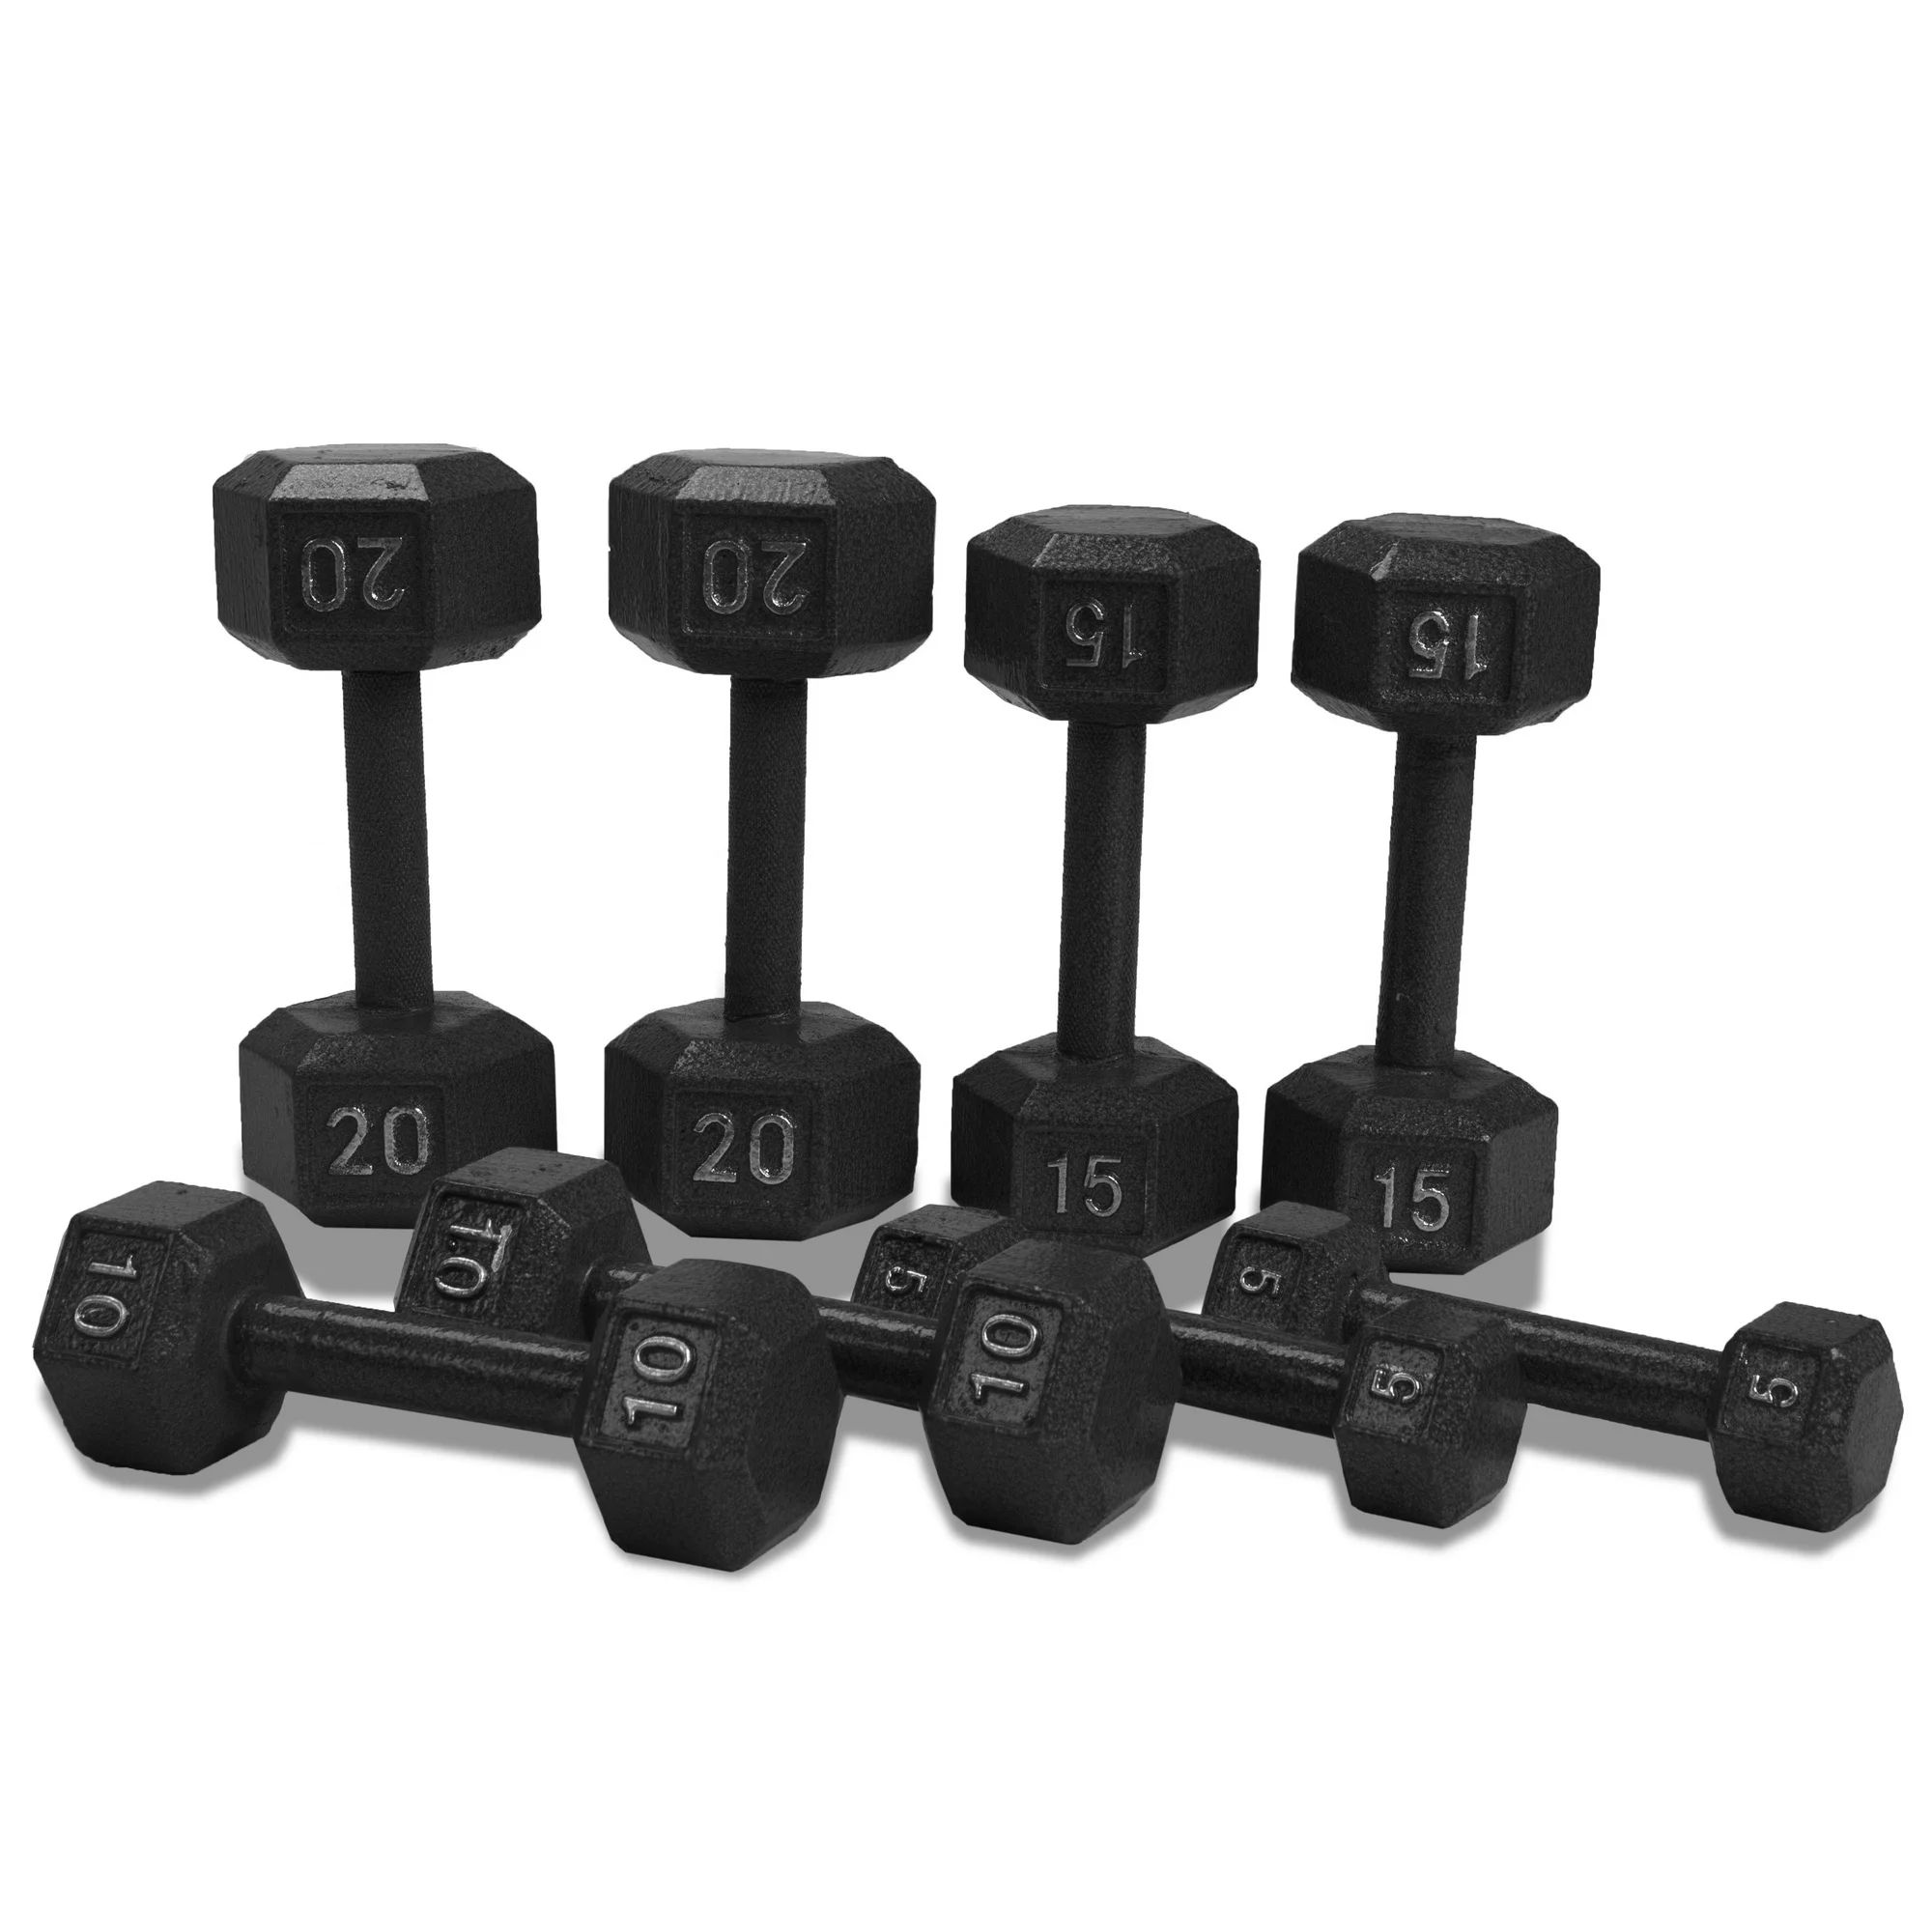 Cap Barbell 100 lb Cast Iron Hex Dumbbell Weight Set with Rack, Black | Walmart (US)